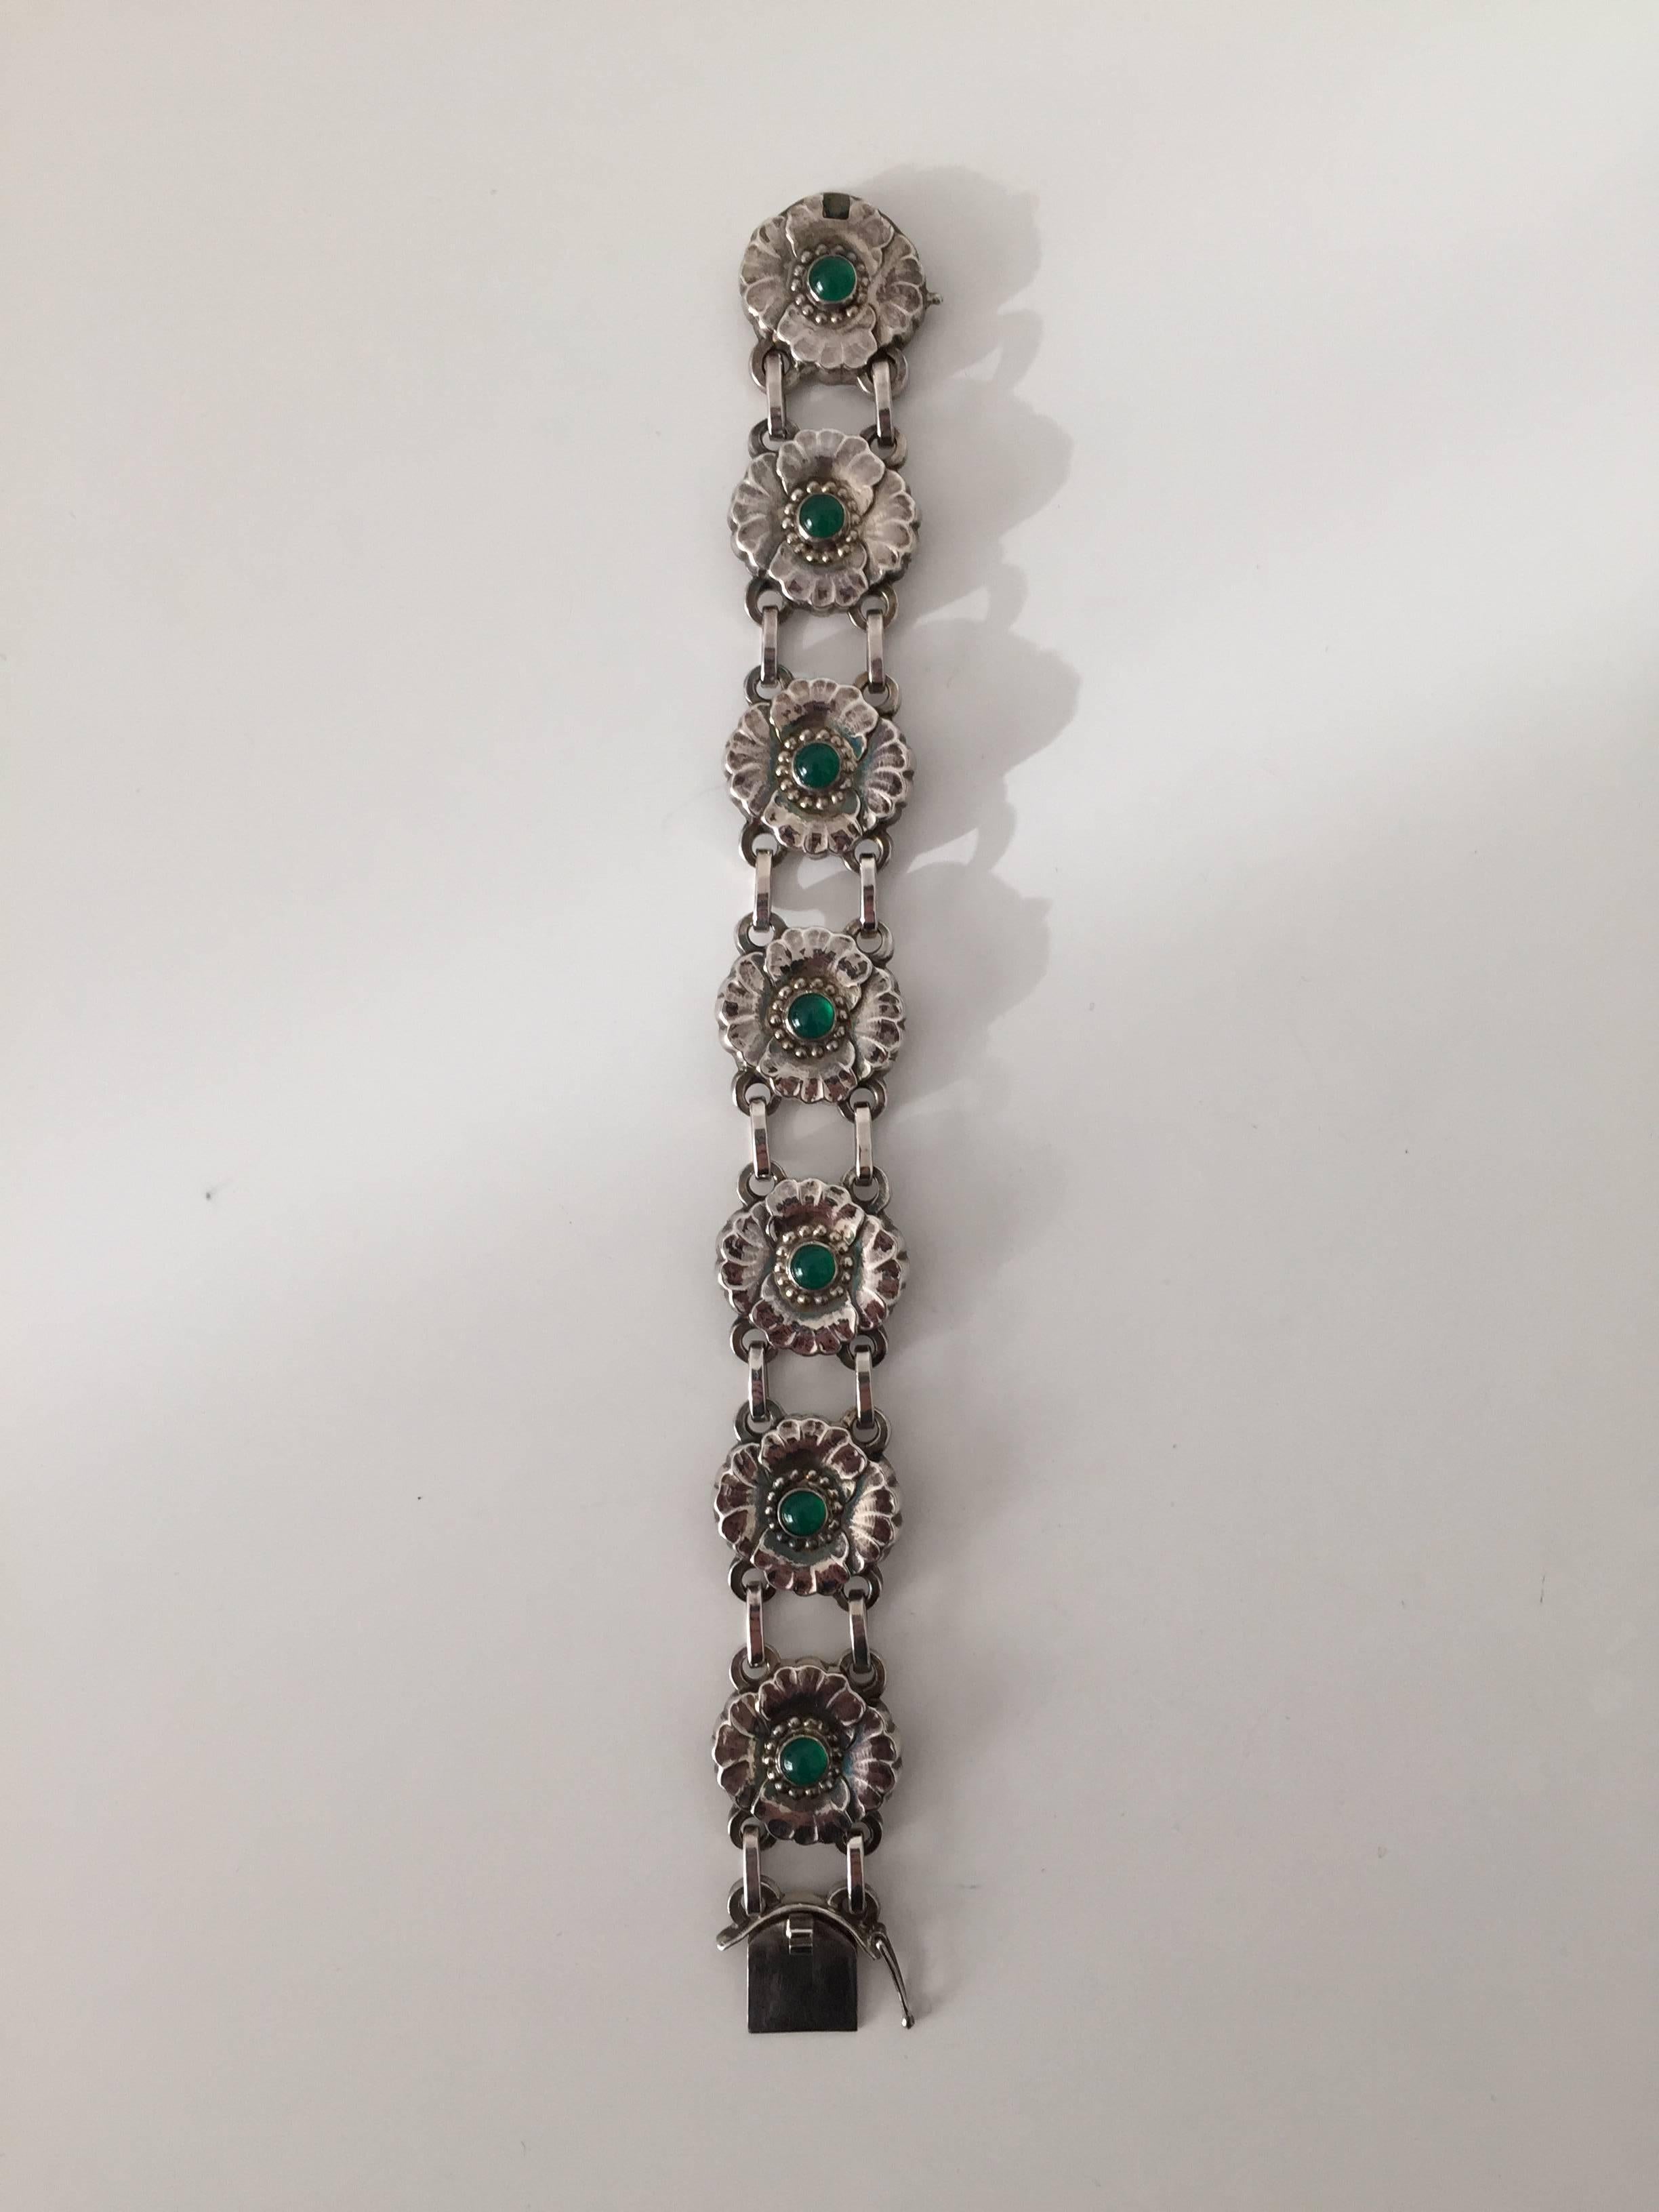 Georg Jensen sterling silver bracelet #36 with green stones. Is in perfect condition.

Measures: 19 cm long. 2 cm wide. 
Weighs 32.8 g / 1.15 oz.